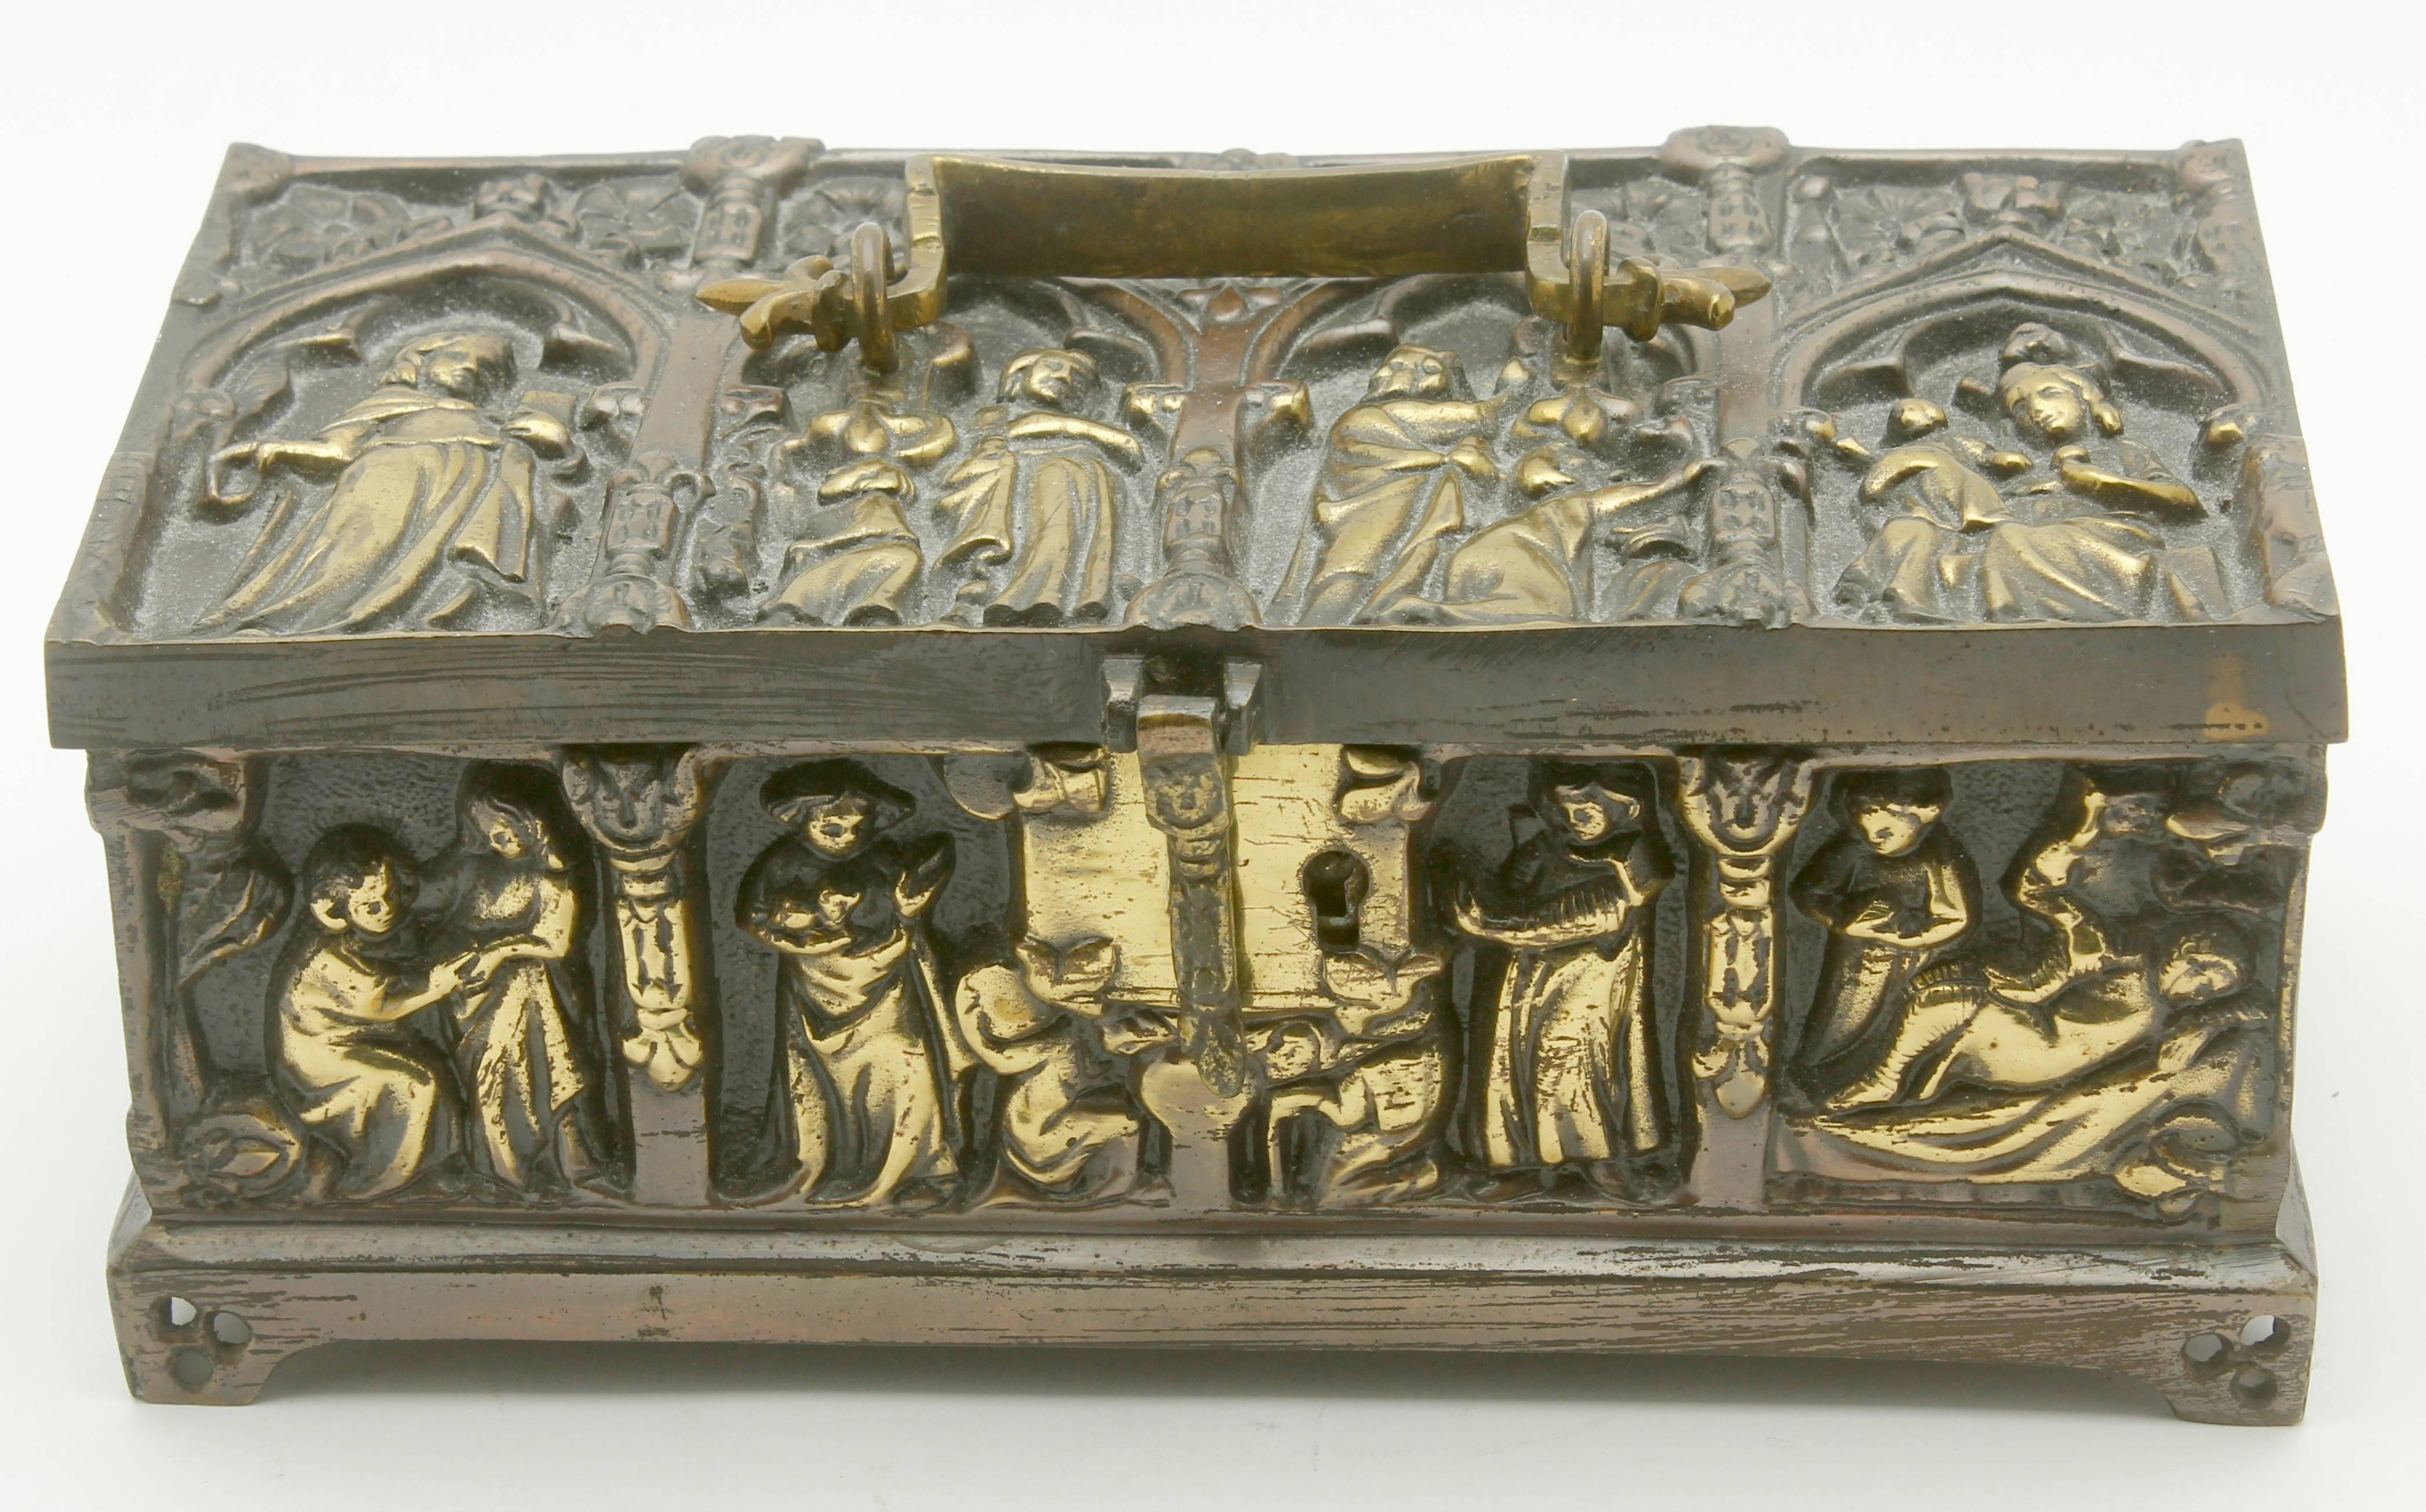 20th Century French Bronze Jewelry Casket, Cast Gilt Bronze and Panels of Medieval Scenes